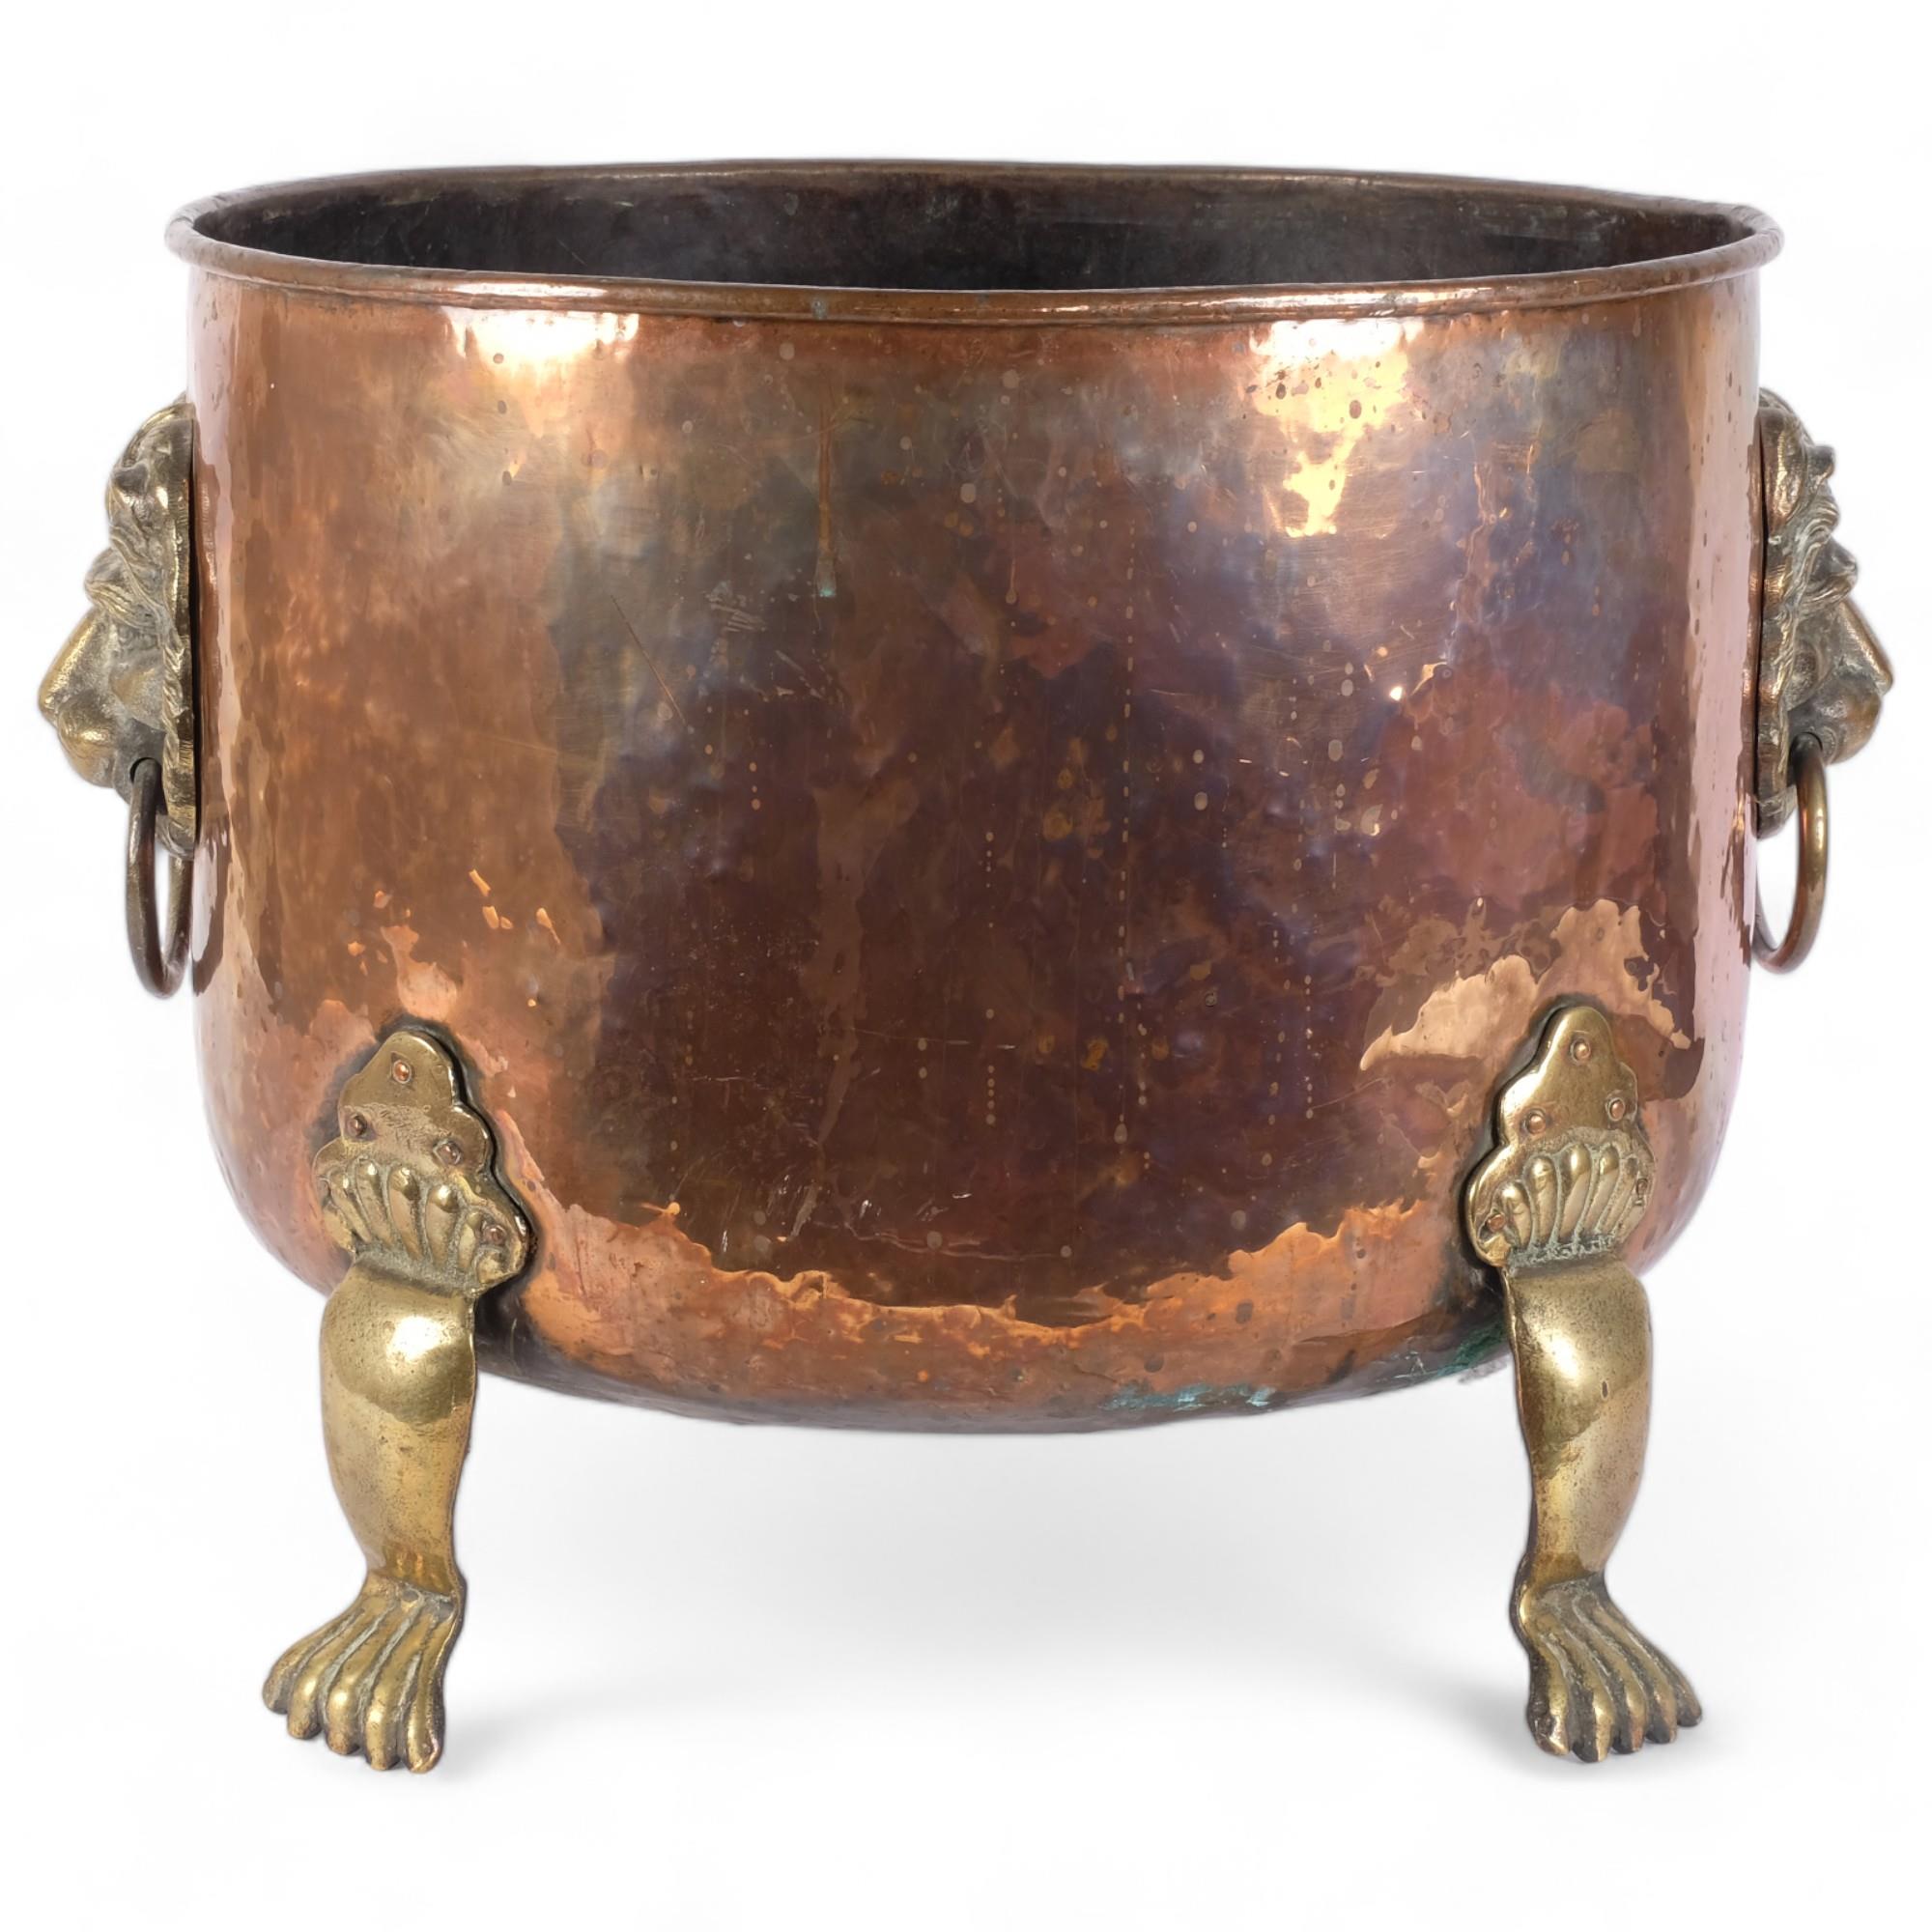 A large Victorian hammered copper jardiniere, with cast-brass lion mask ring handles, and brass